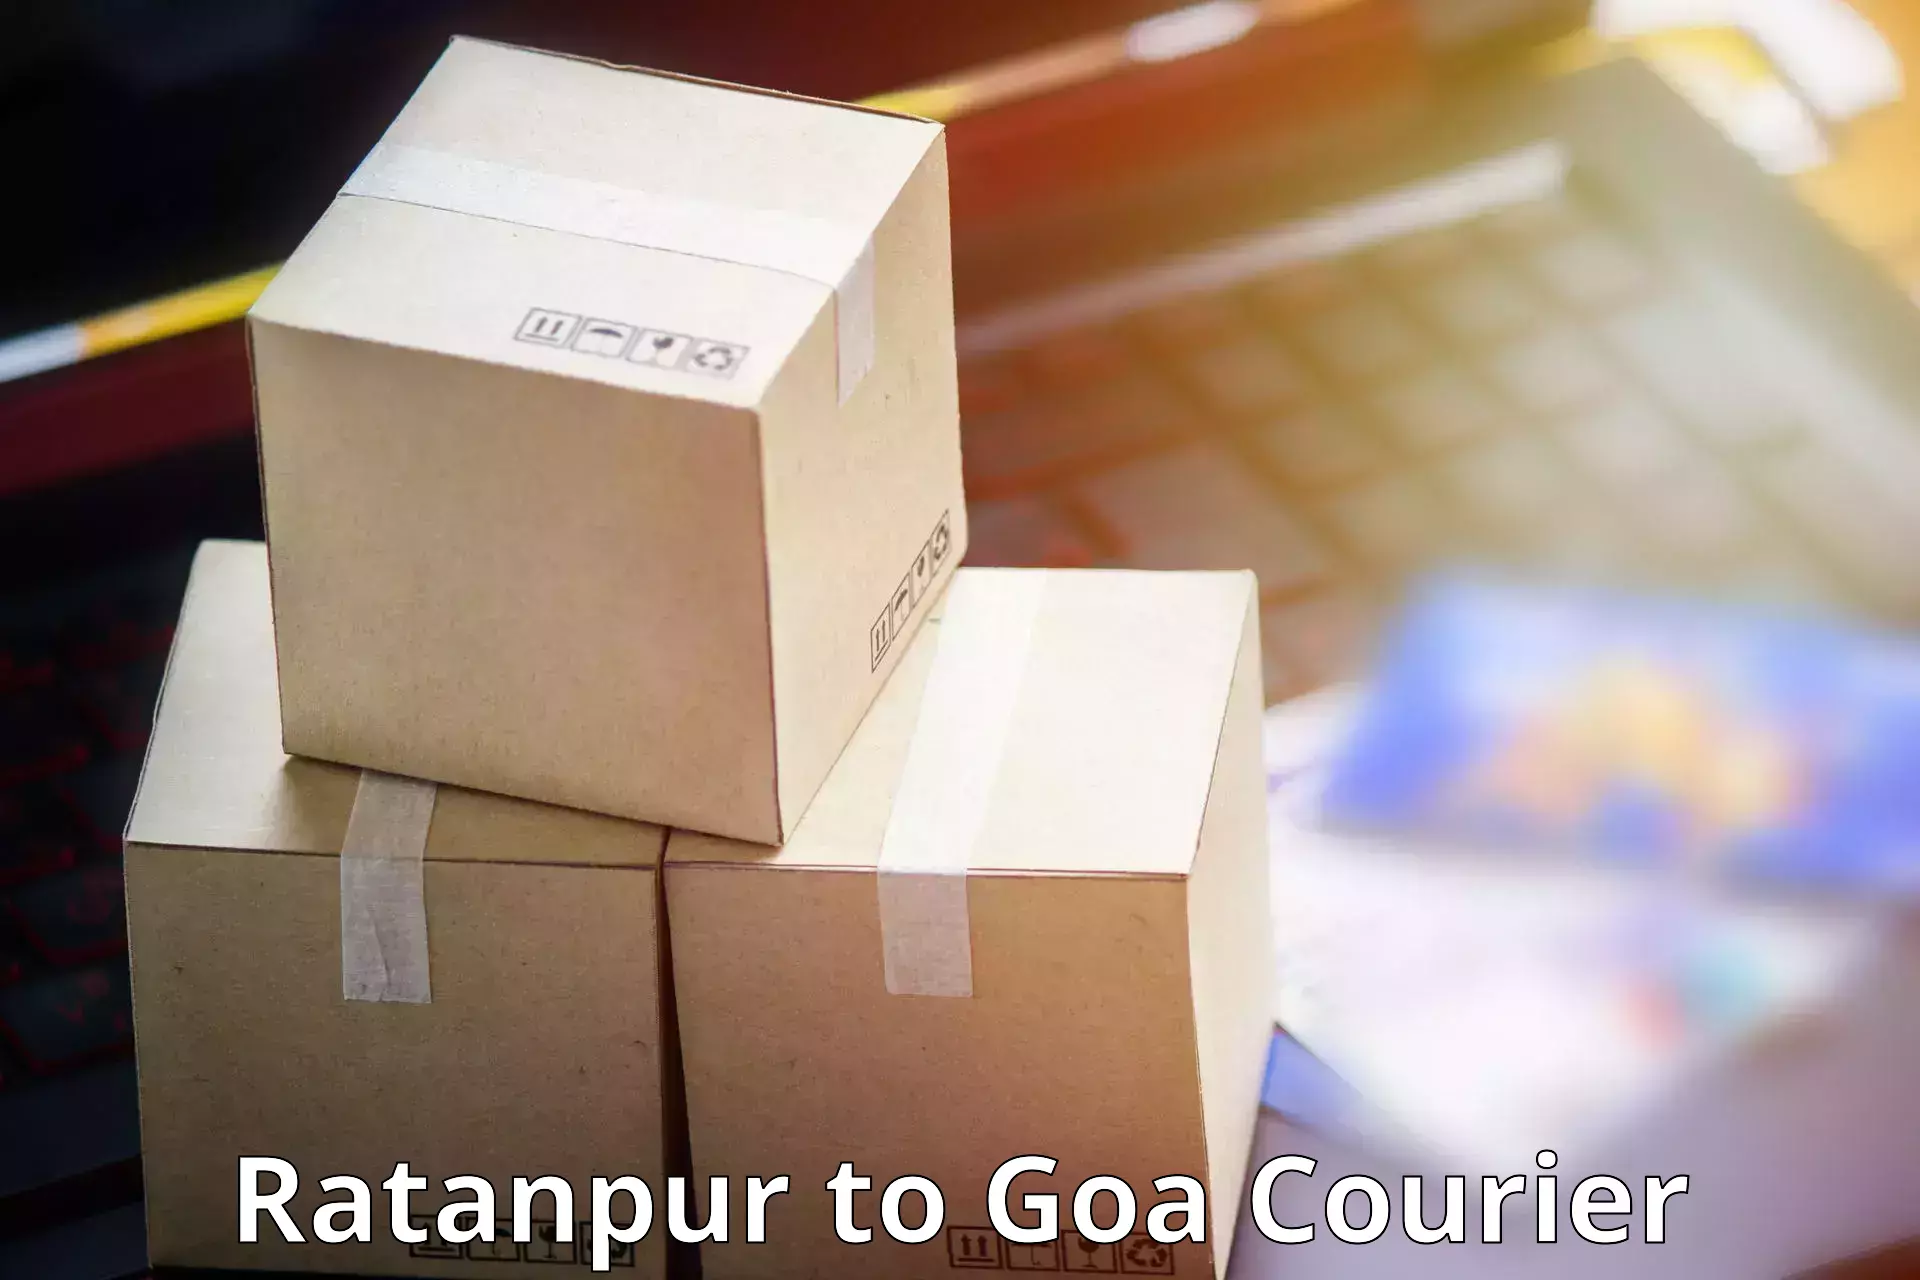 Courier service partnerships Ratanpur to Goa